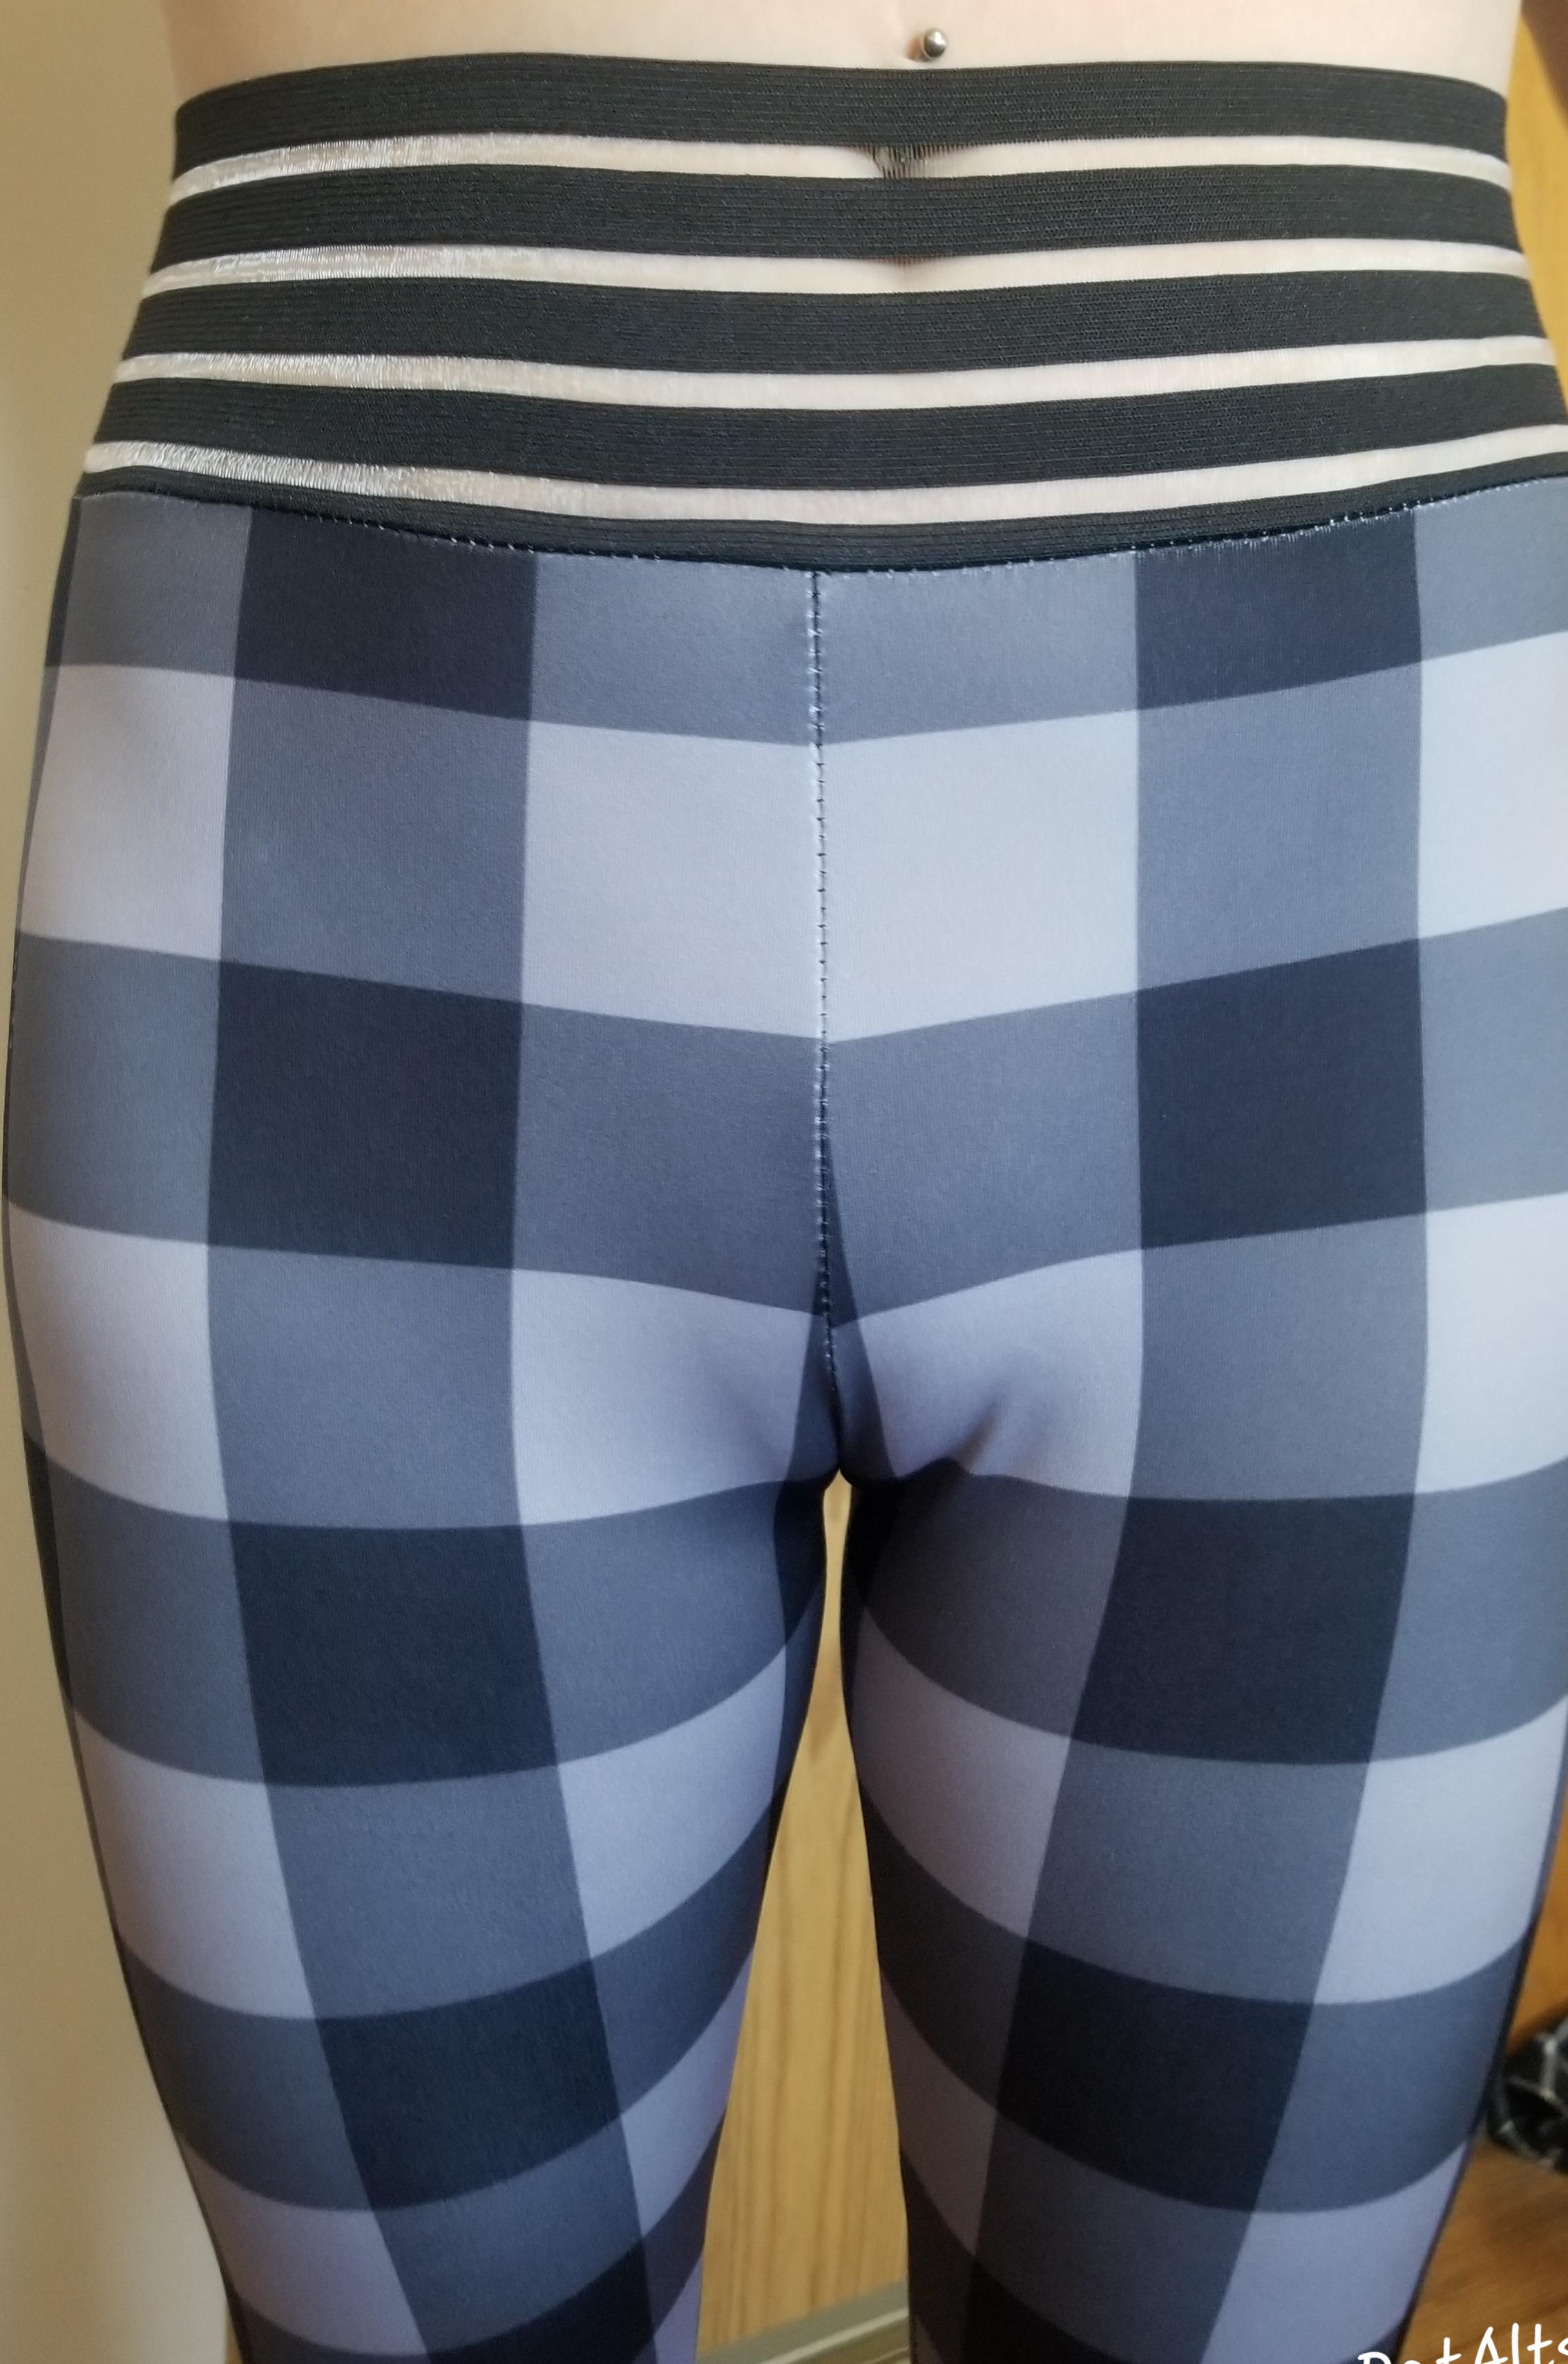 Plaid pants with camel toe